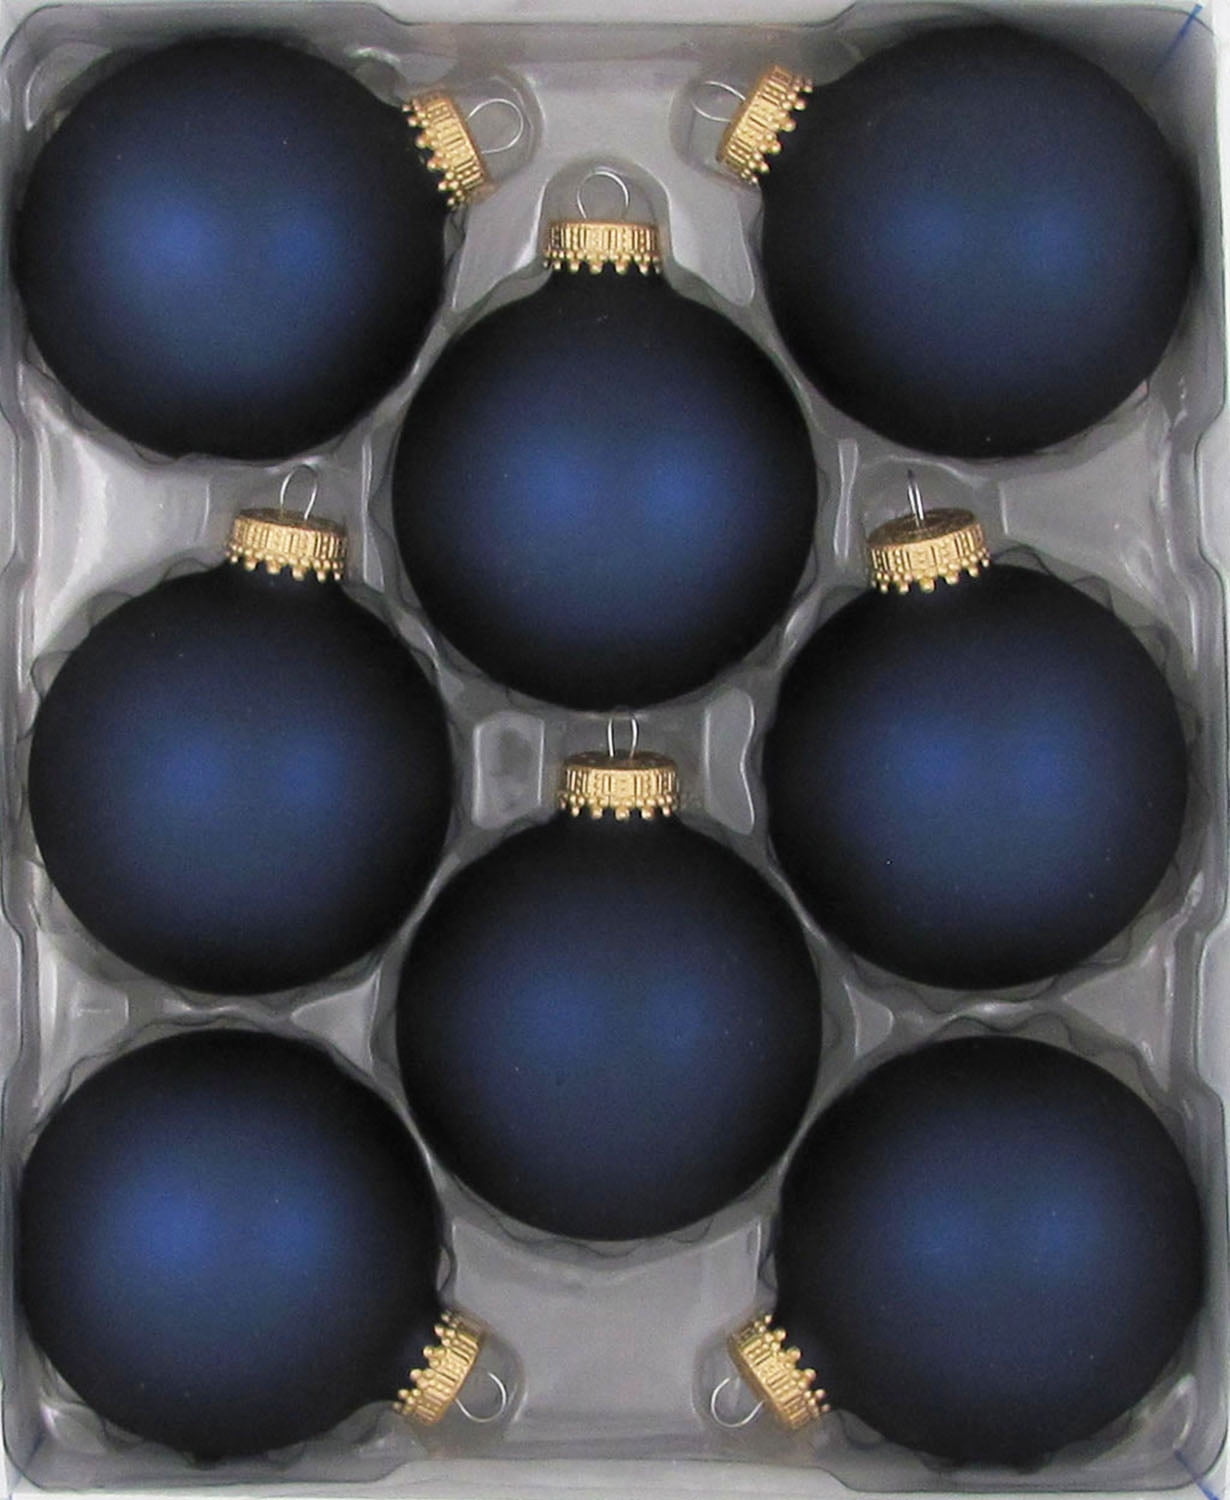 Holiday Time Dark Blue Matte 2 5/8" (67mm) Glass Christmas Ornaments 8 Count